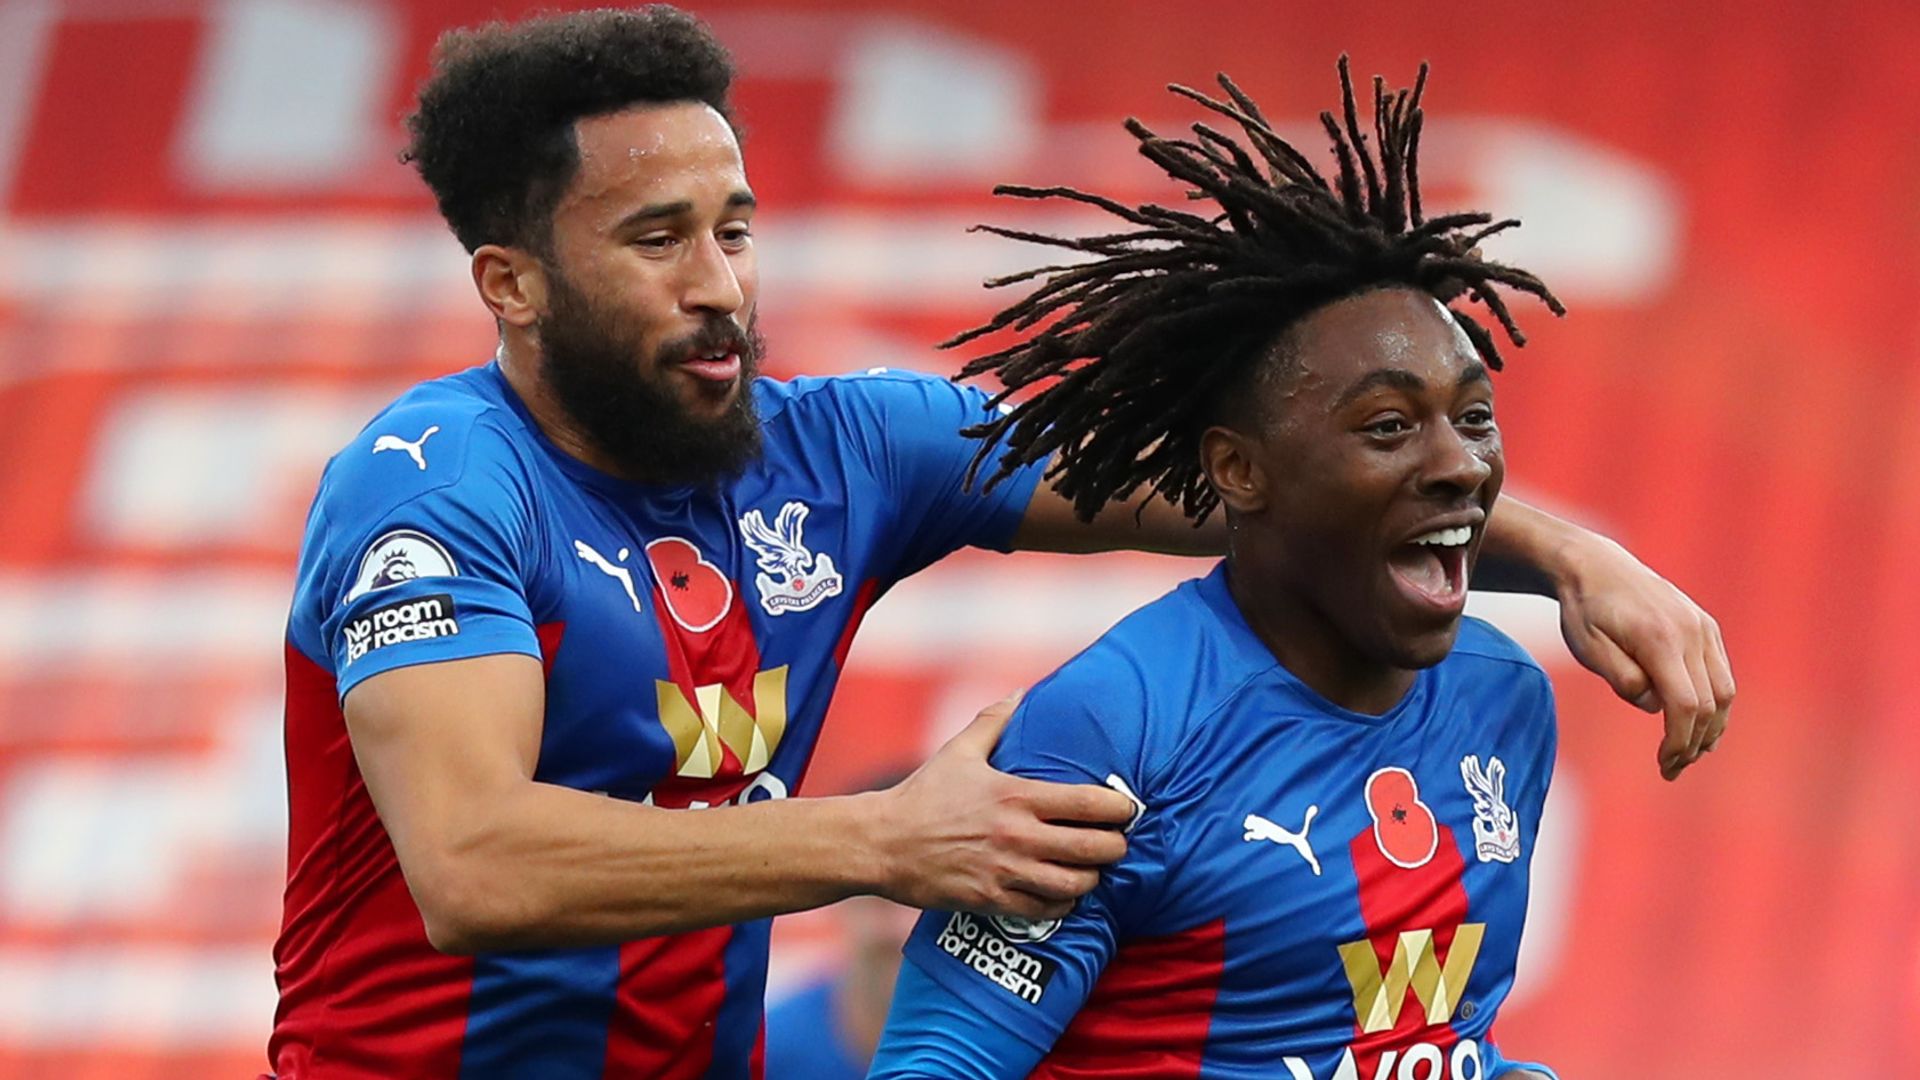 Burnley vs Crystal Palace on Sky: Will Eze be fit?